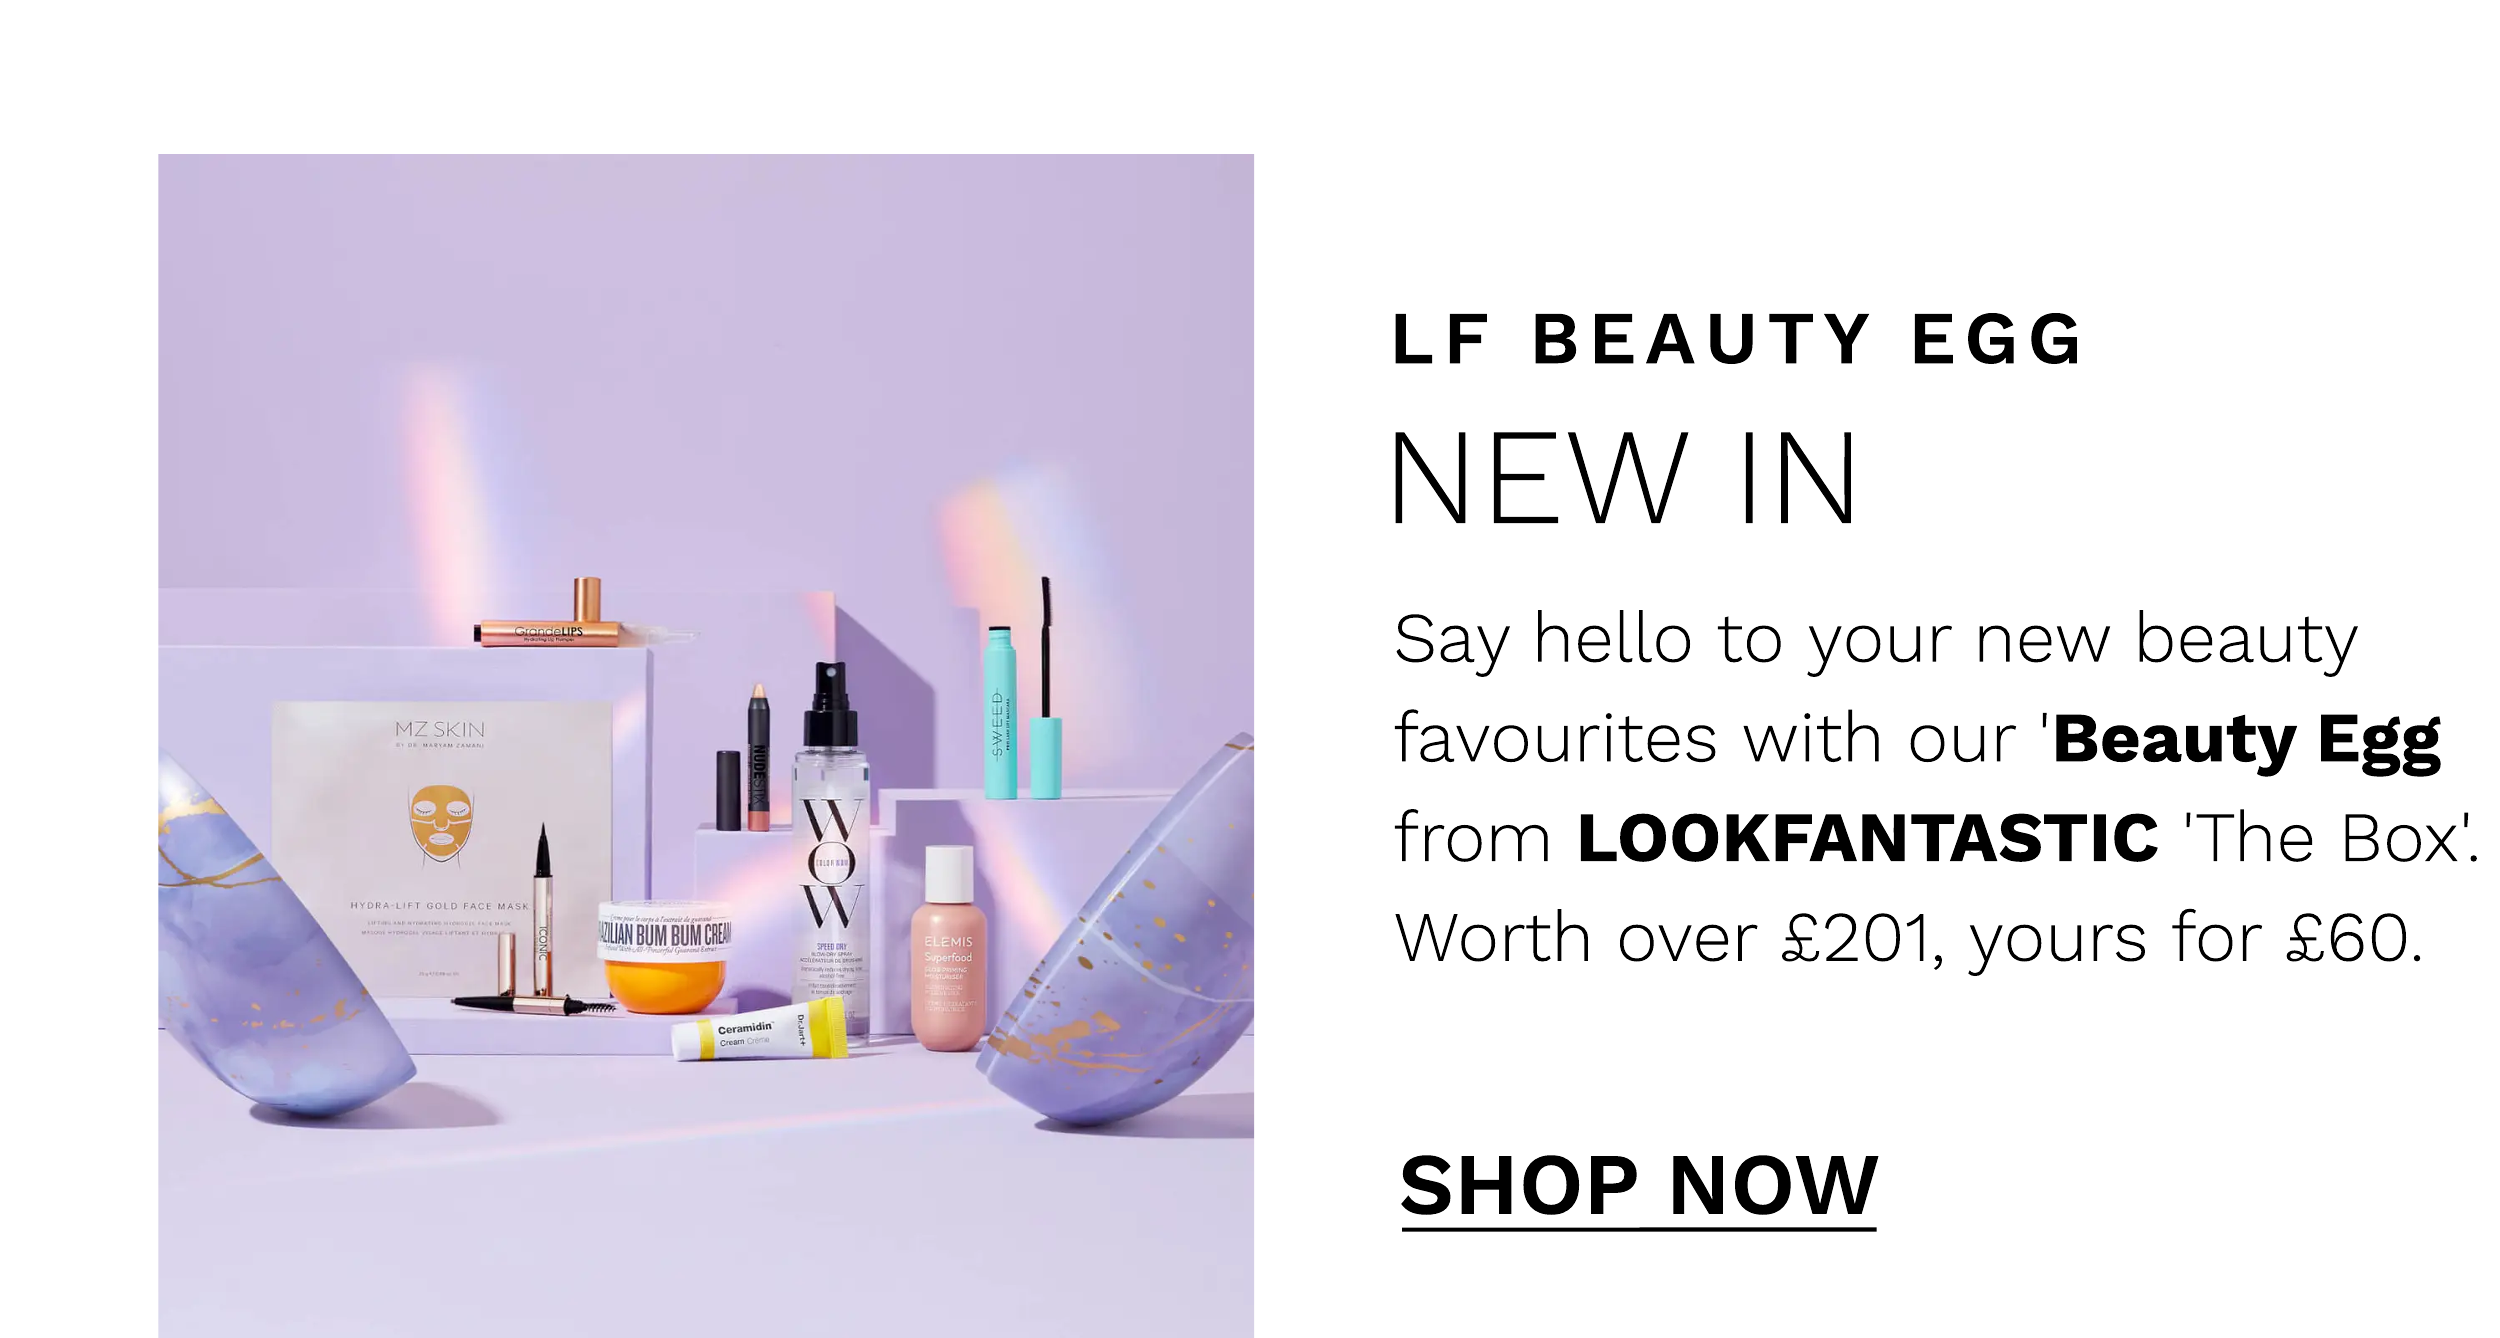  LF BEAUTY EGG NEW IN Say hello to your new beauty favourites with our 'Beauty Egg from LOOKFANTASTIC 'The Box. Worth over 201, yours for 60. SHOP NOW 